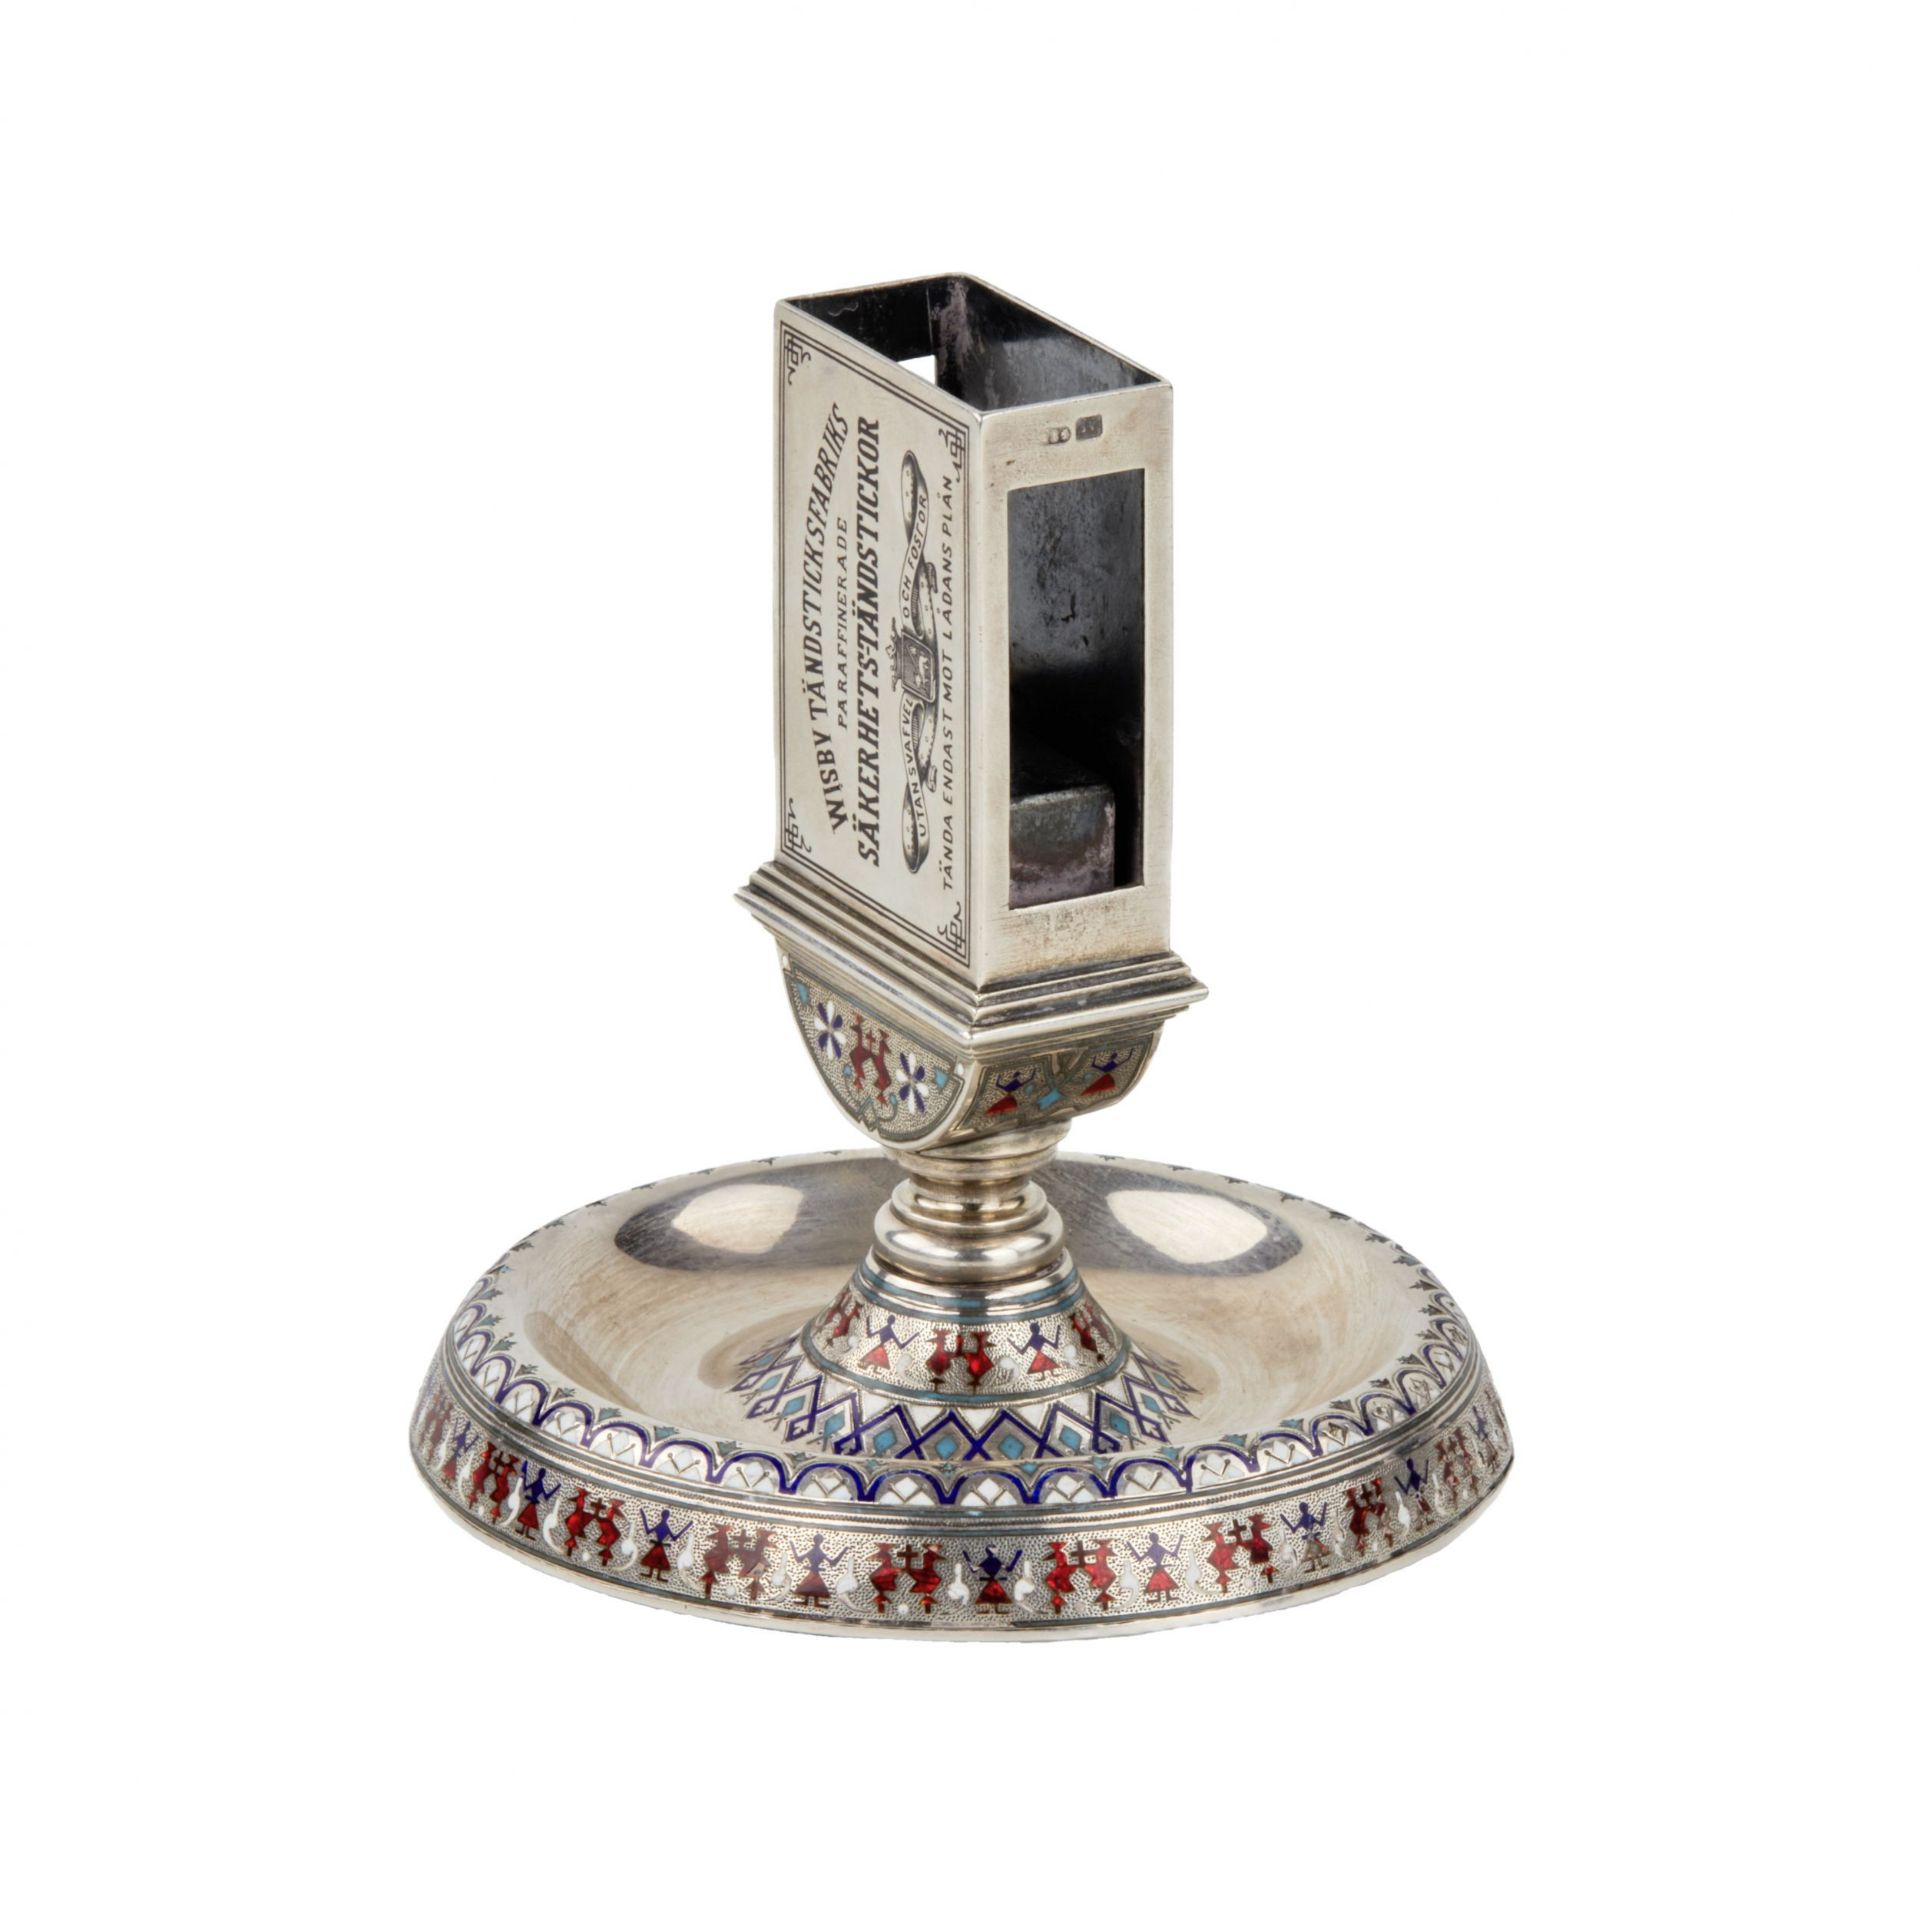 Russian silver match stand. Andrey Bragin, St. Petersburg, 88 sample. End of the 19th century. - Image 2 of 8